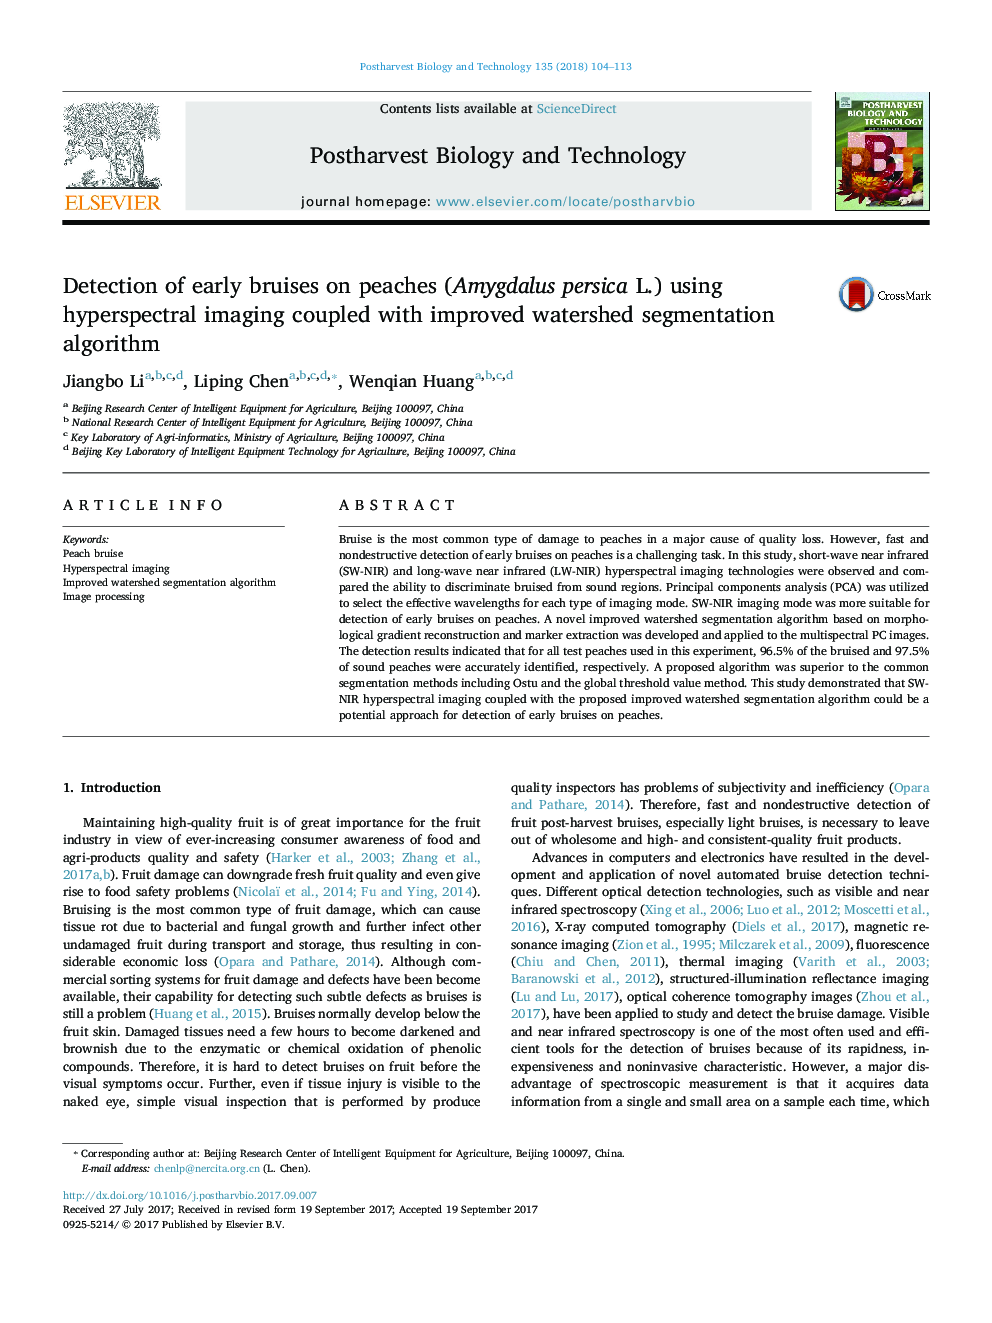 Detection of early bruises on peaches (Amygdalus persica L.) using hyperspectral imaging coupled with improved watershed segmentation algorithm